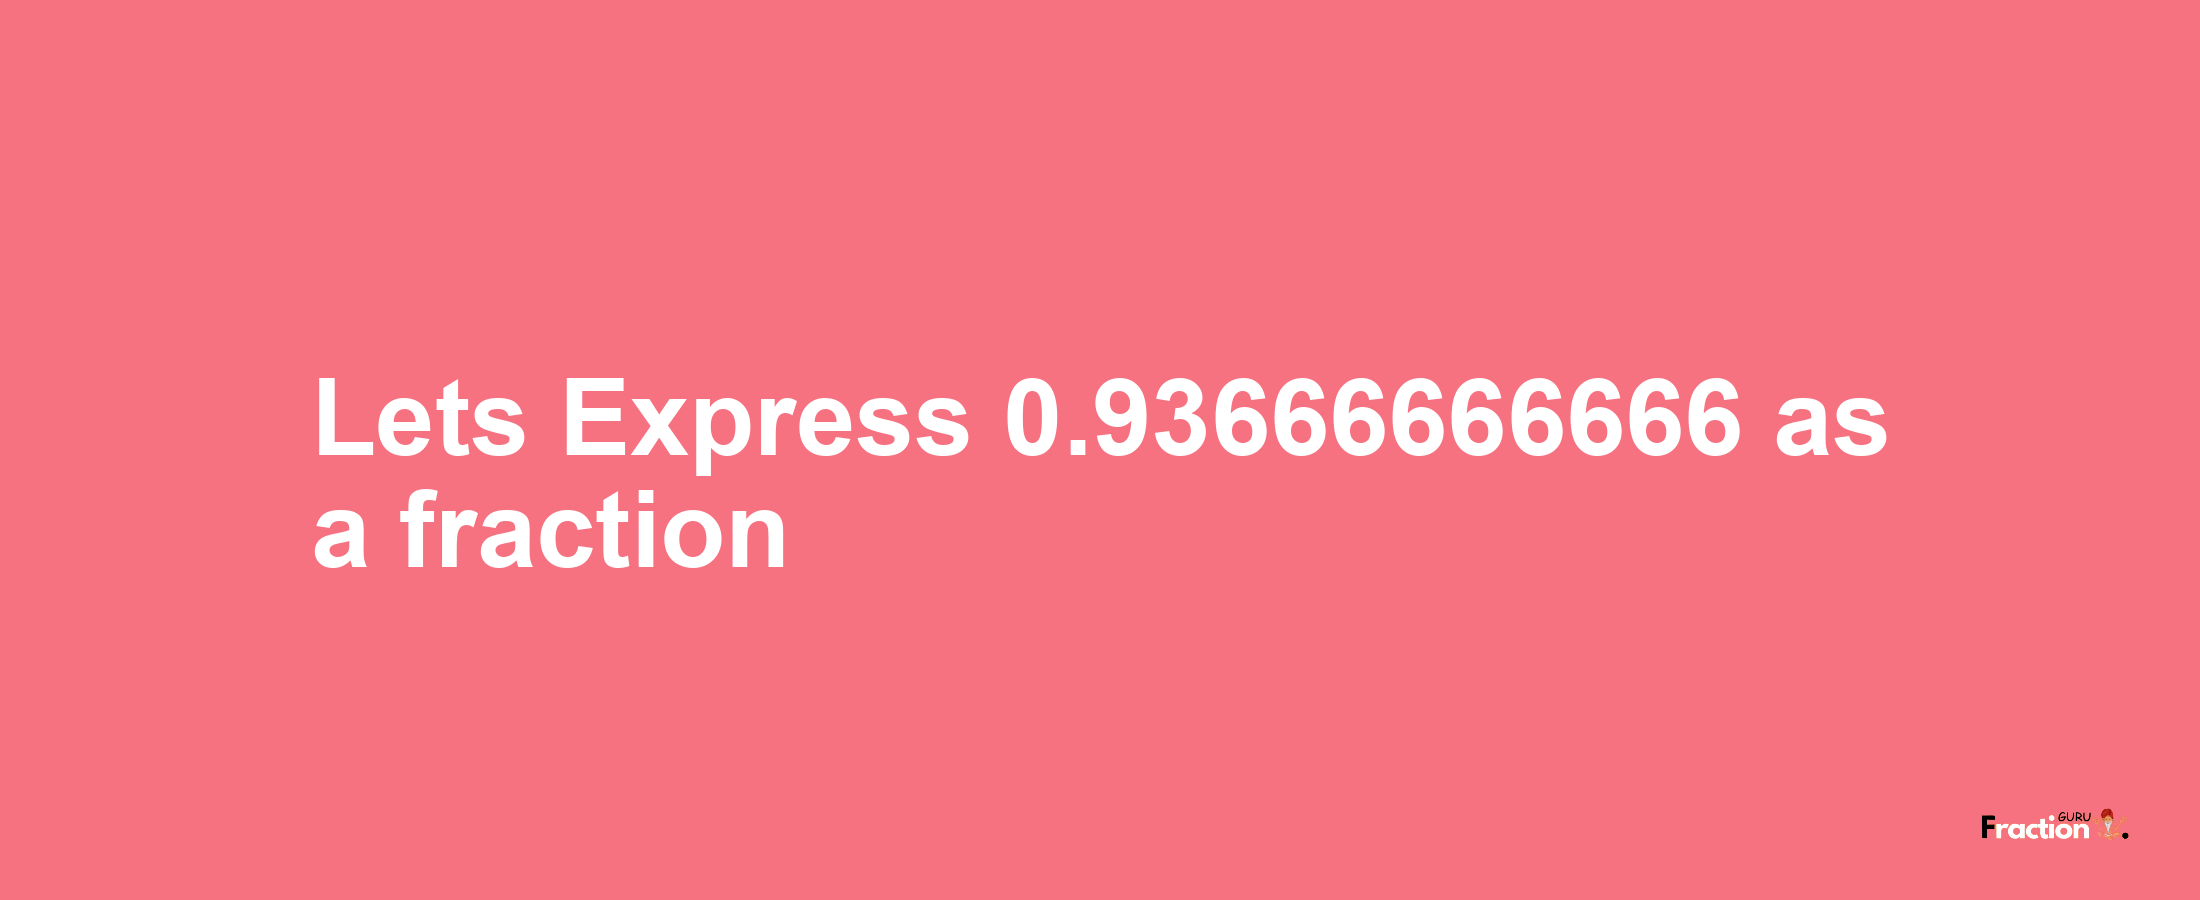 Lets Express 0.93666666666 as afraction